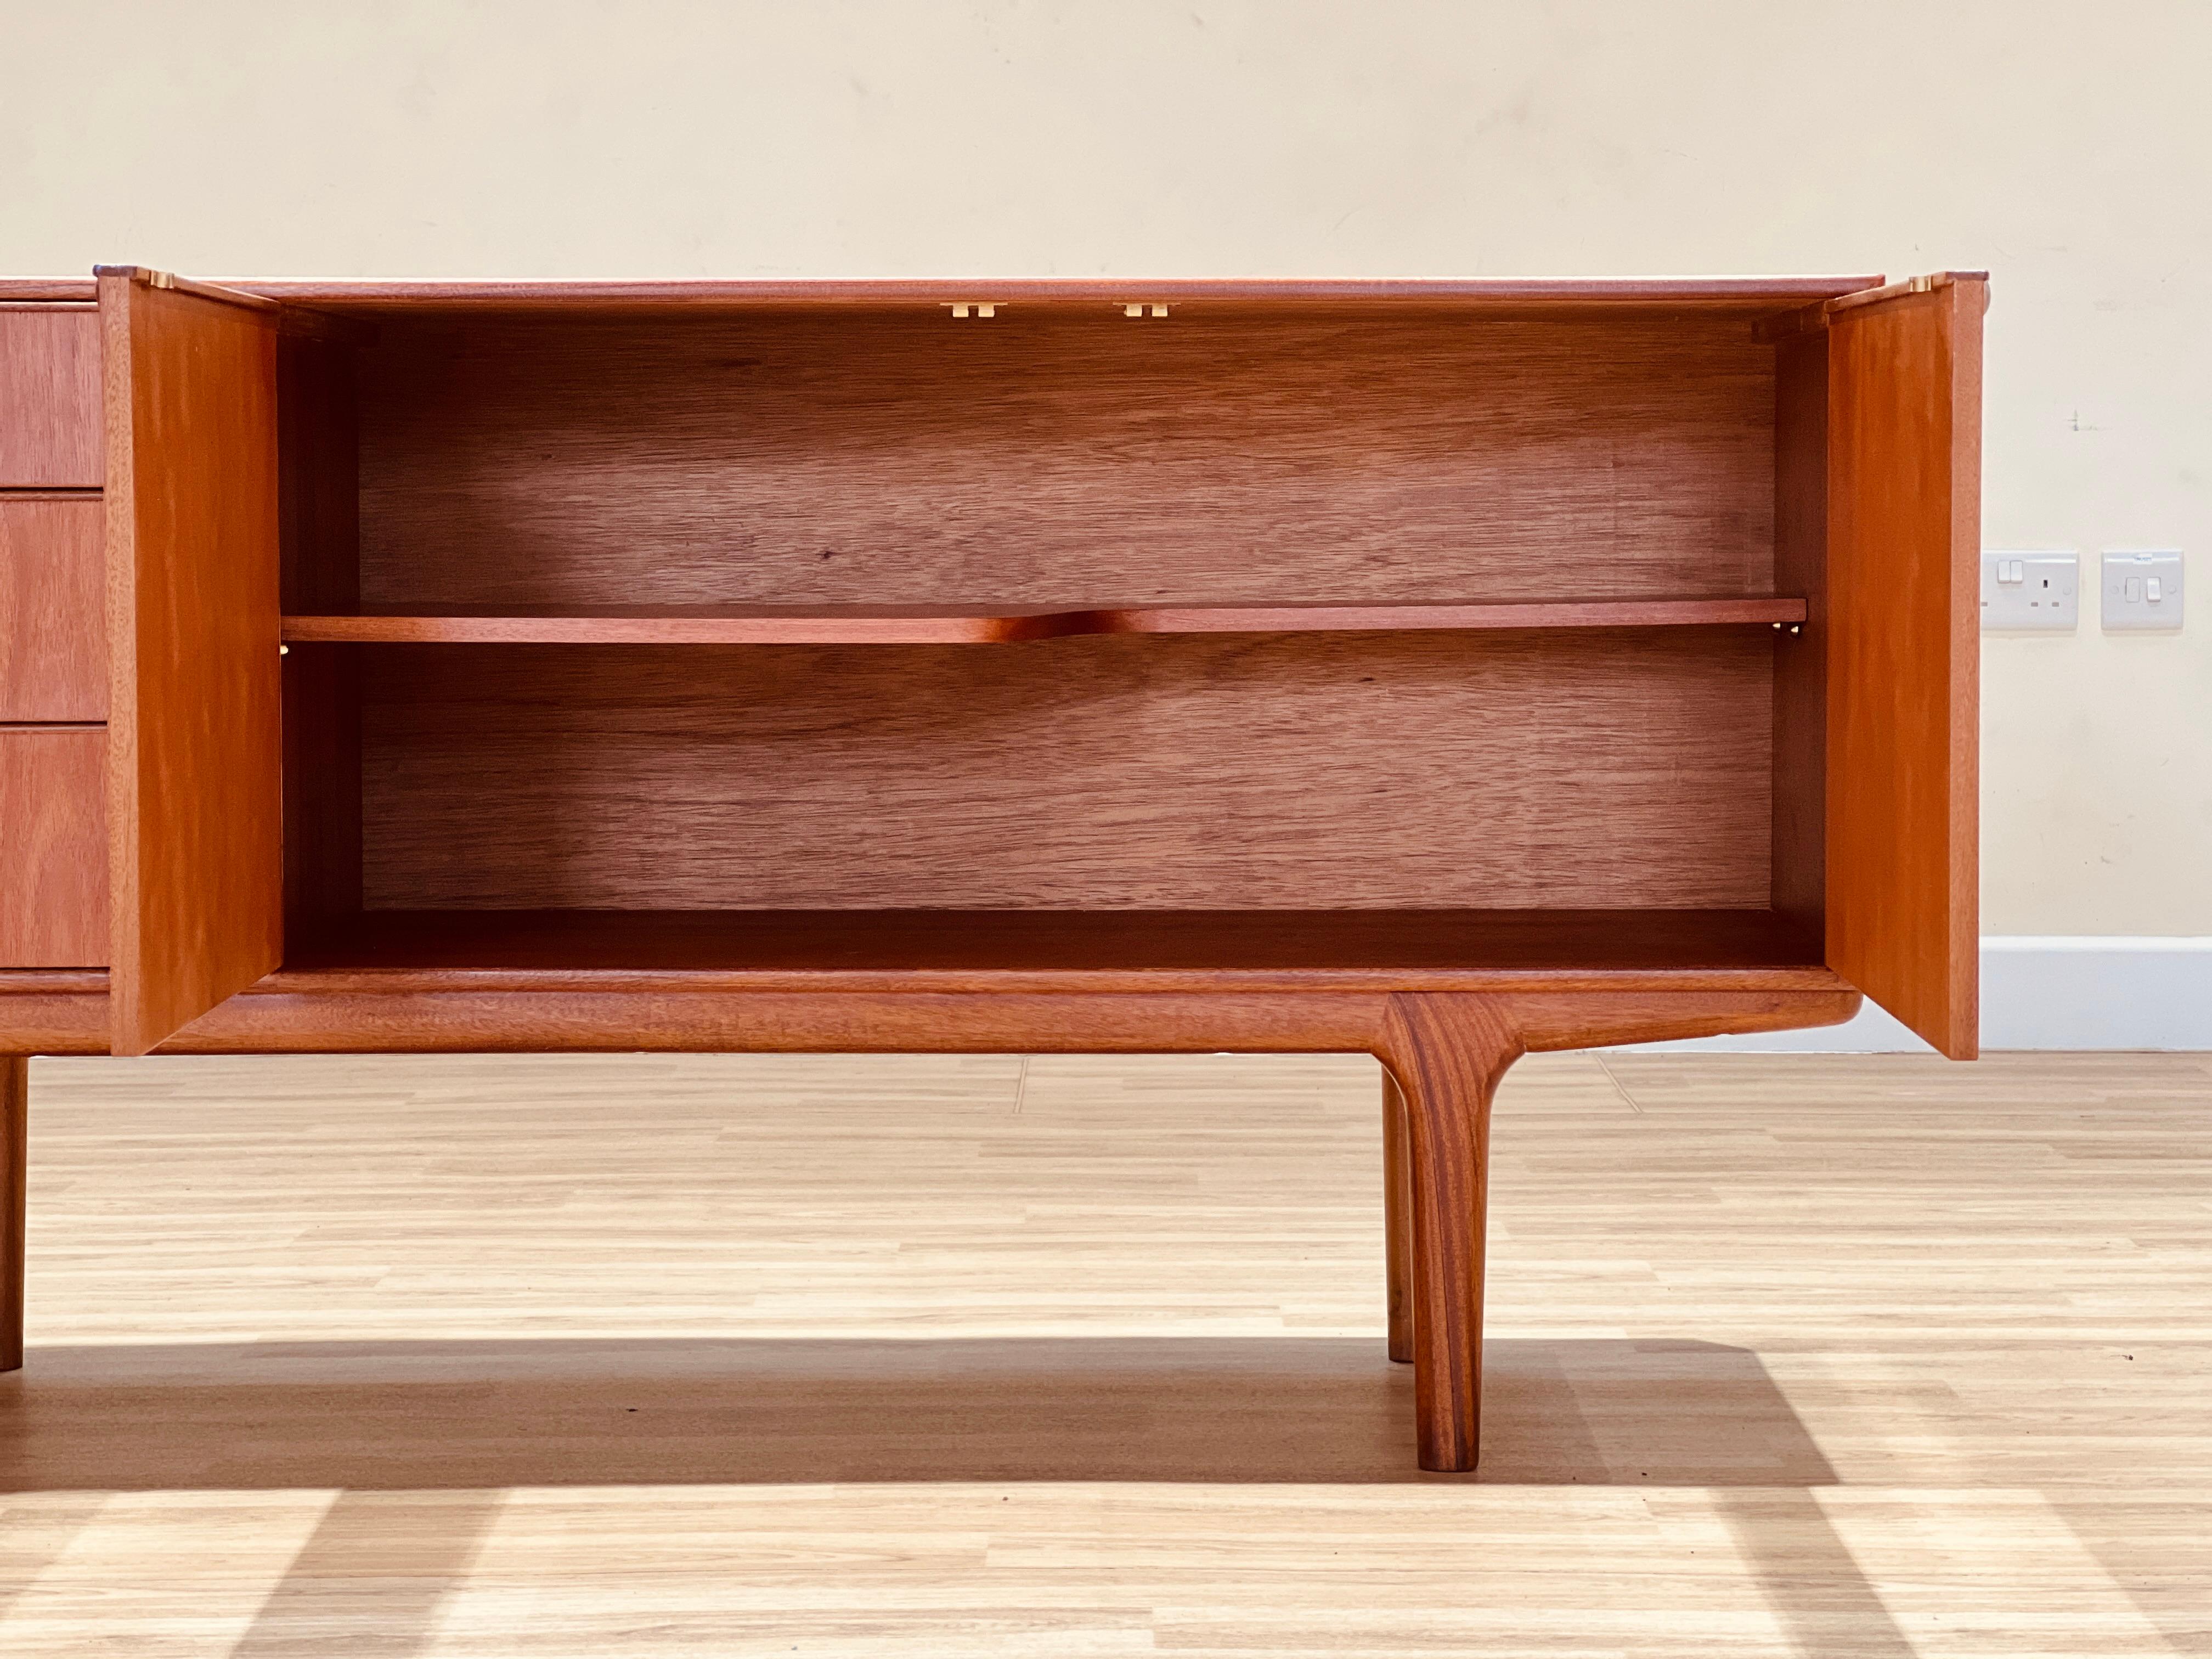 McIntosh Sideboard in Teak (Moy Collection) In Excellent Condition For Sale In Buxton, GB